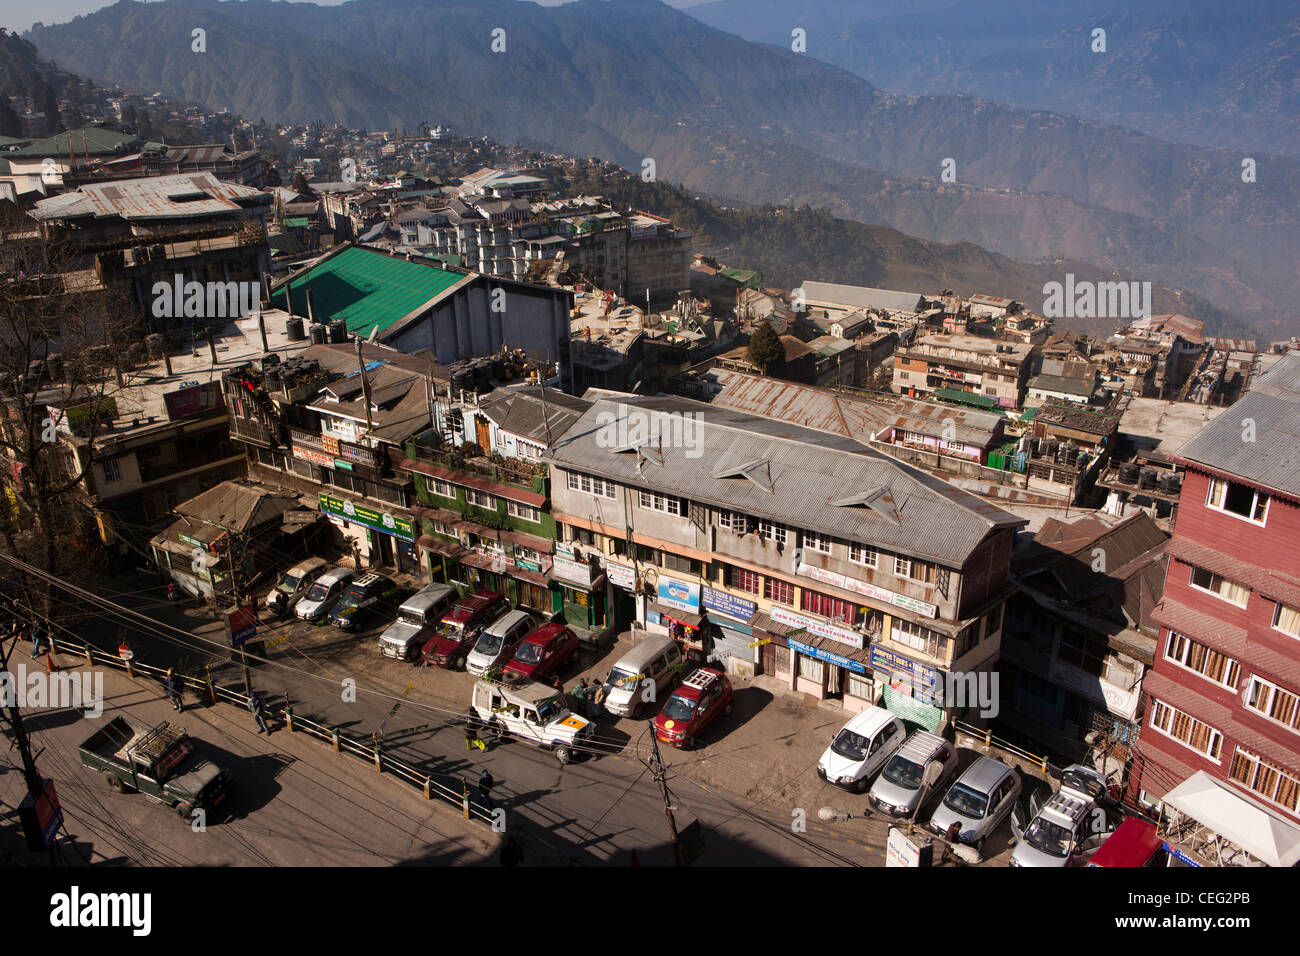 India, West Bengal, Darjeeling, Clubside, town centre shops on steeply sloping hillside Stock Photo